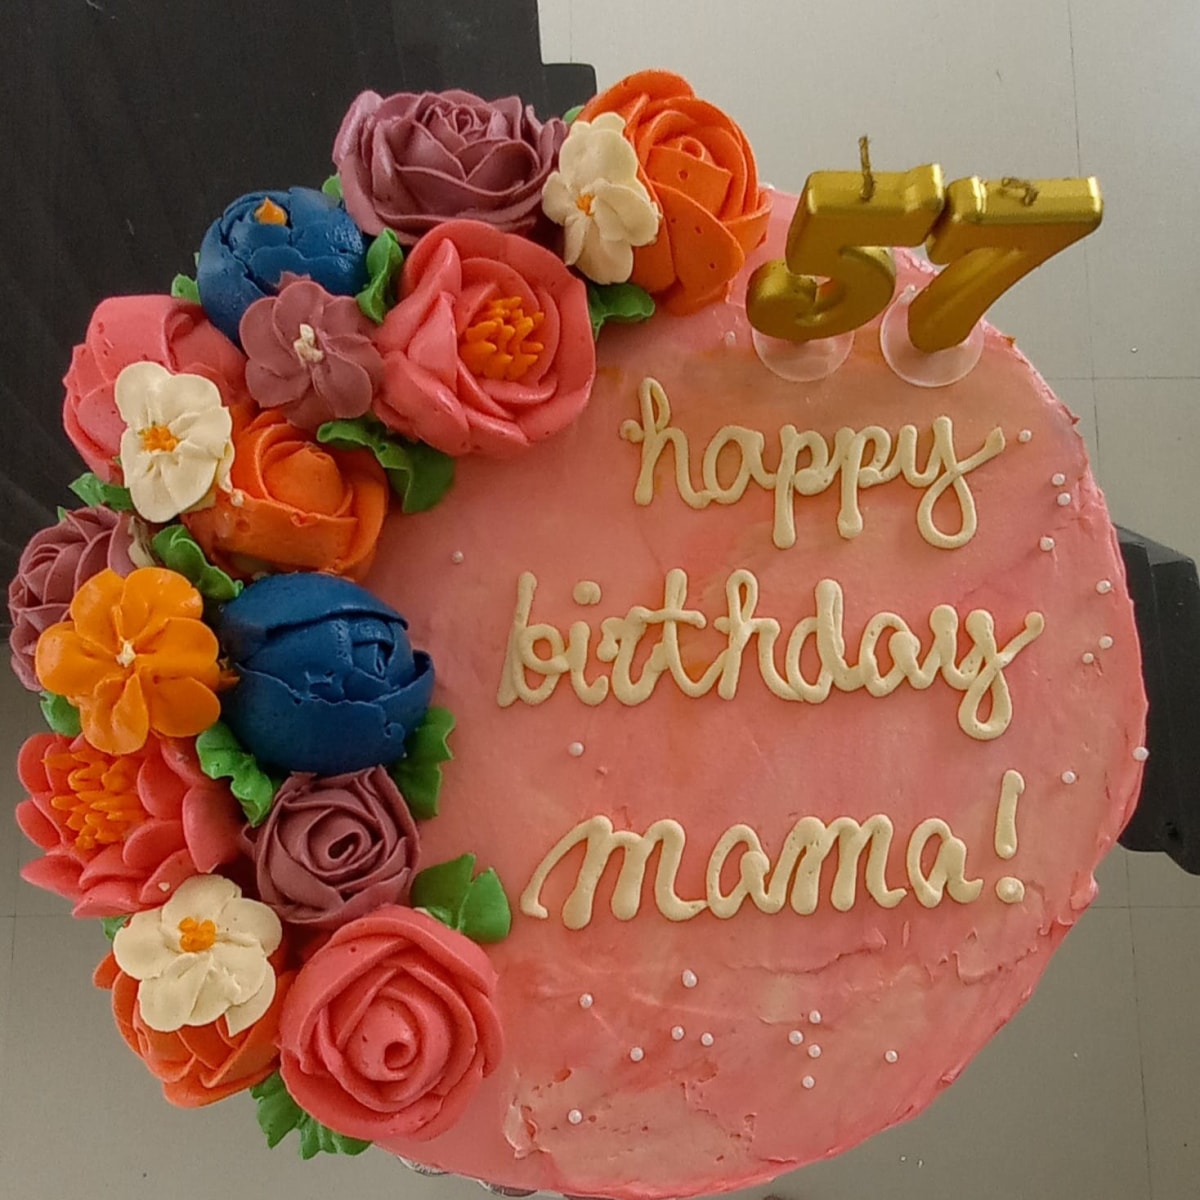 And because its our mama's special... - AJF Cakes & Sweets | Facebook